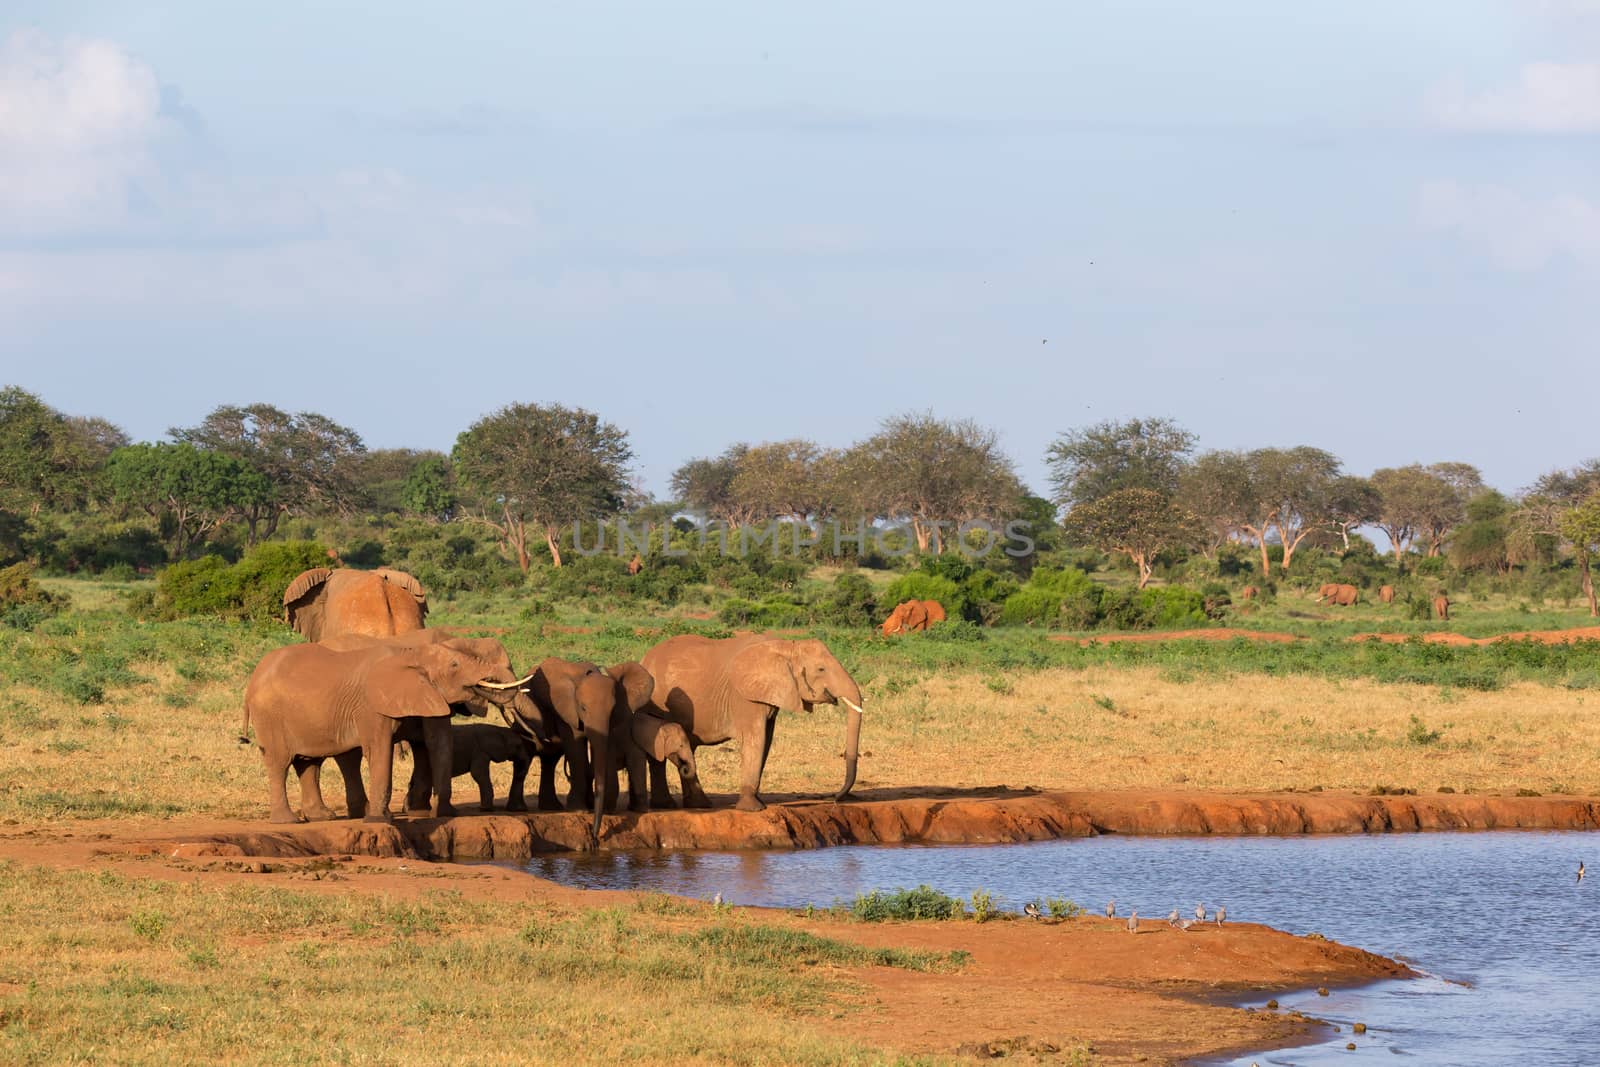 The family of red elephants at a water hole in the middle of the savannah